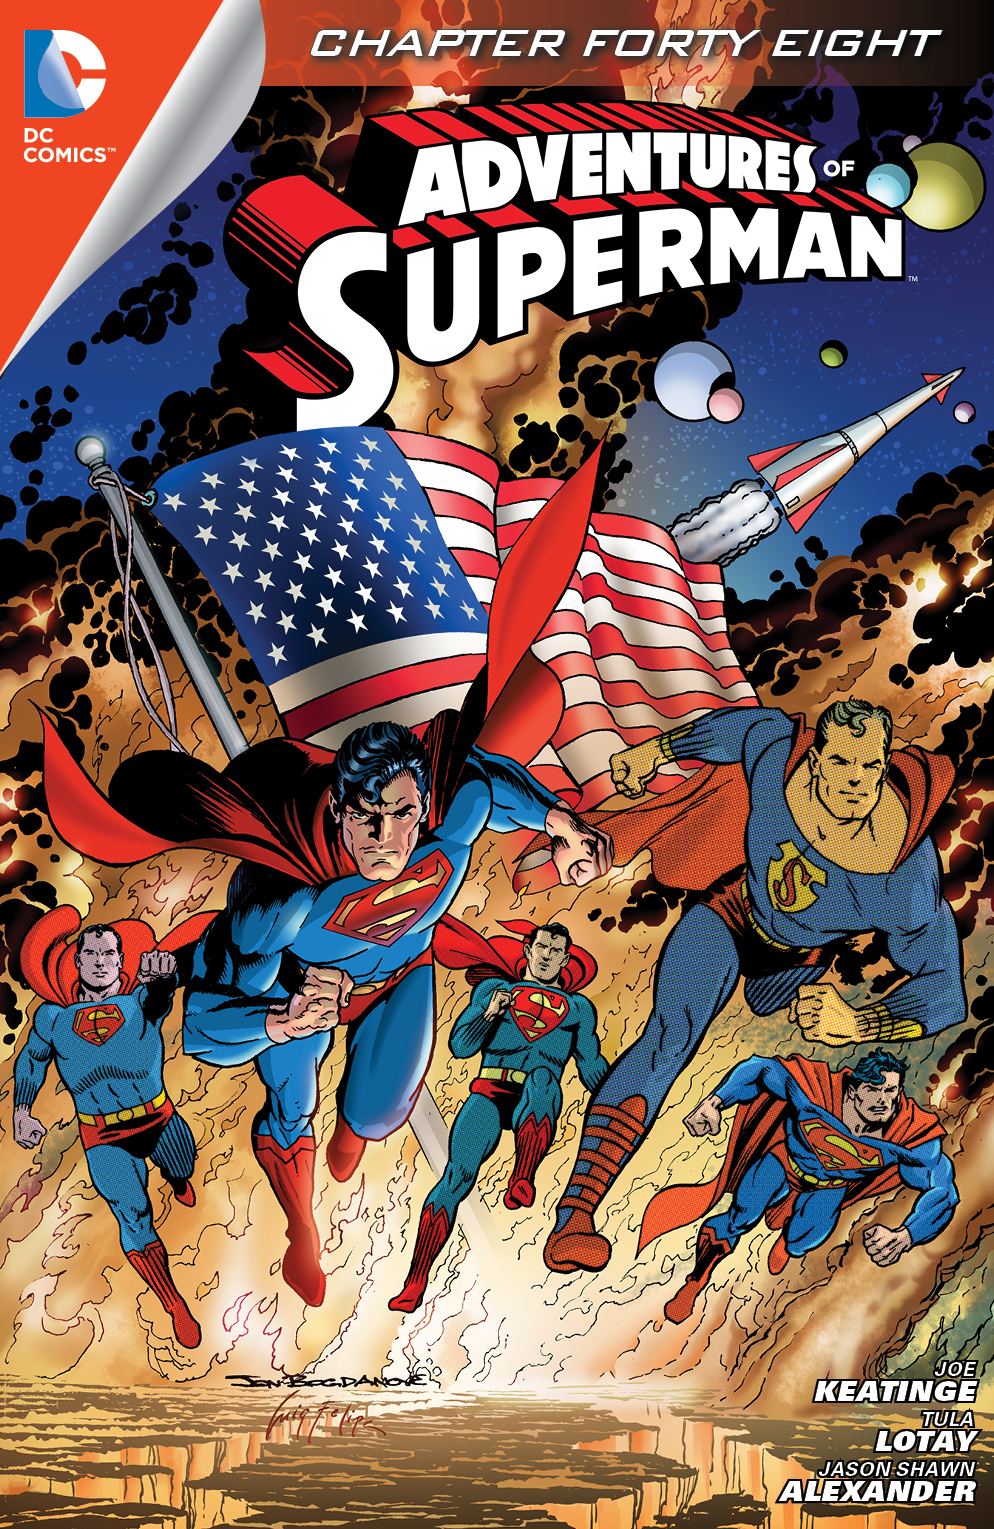 Adventures of Superman (2013-) #48 preview images